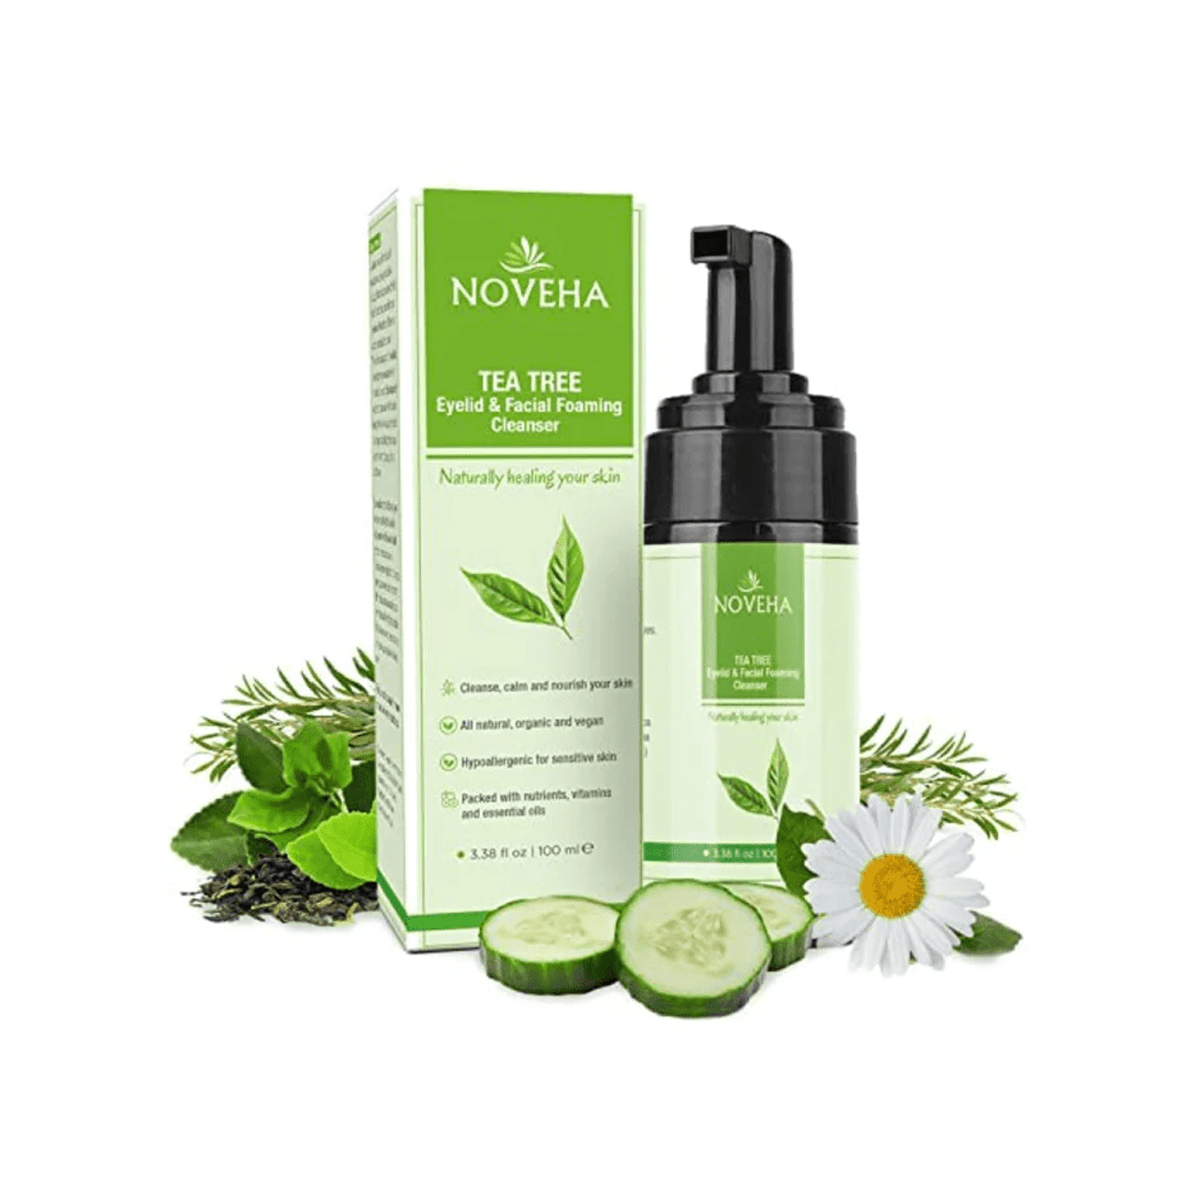 Noveha Tea Tree Oil Foaming Cleanser for Eyelid Irritations, Styes, and Dryness (100mL) - Dryeye Rescue